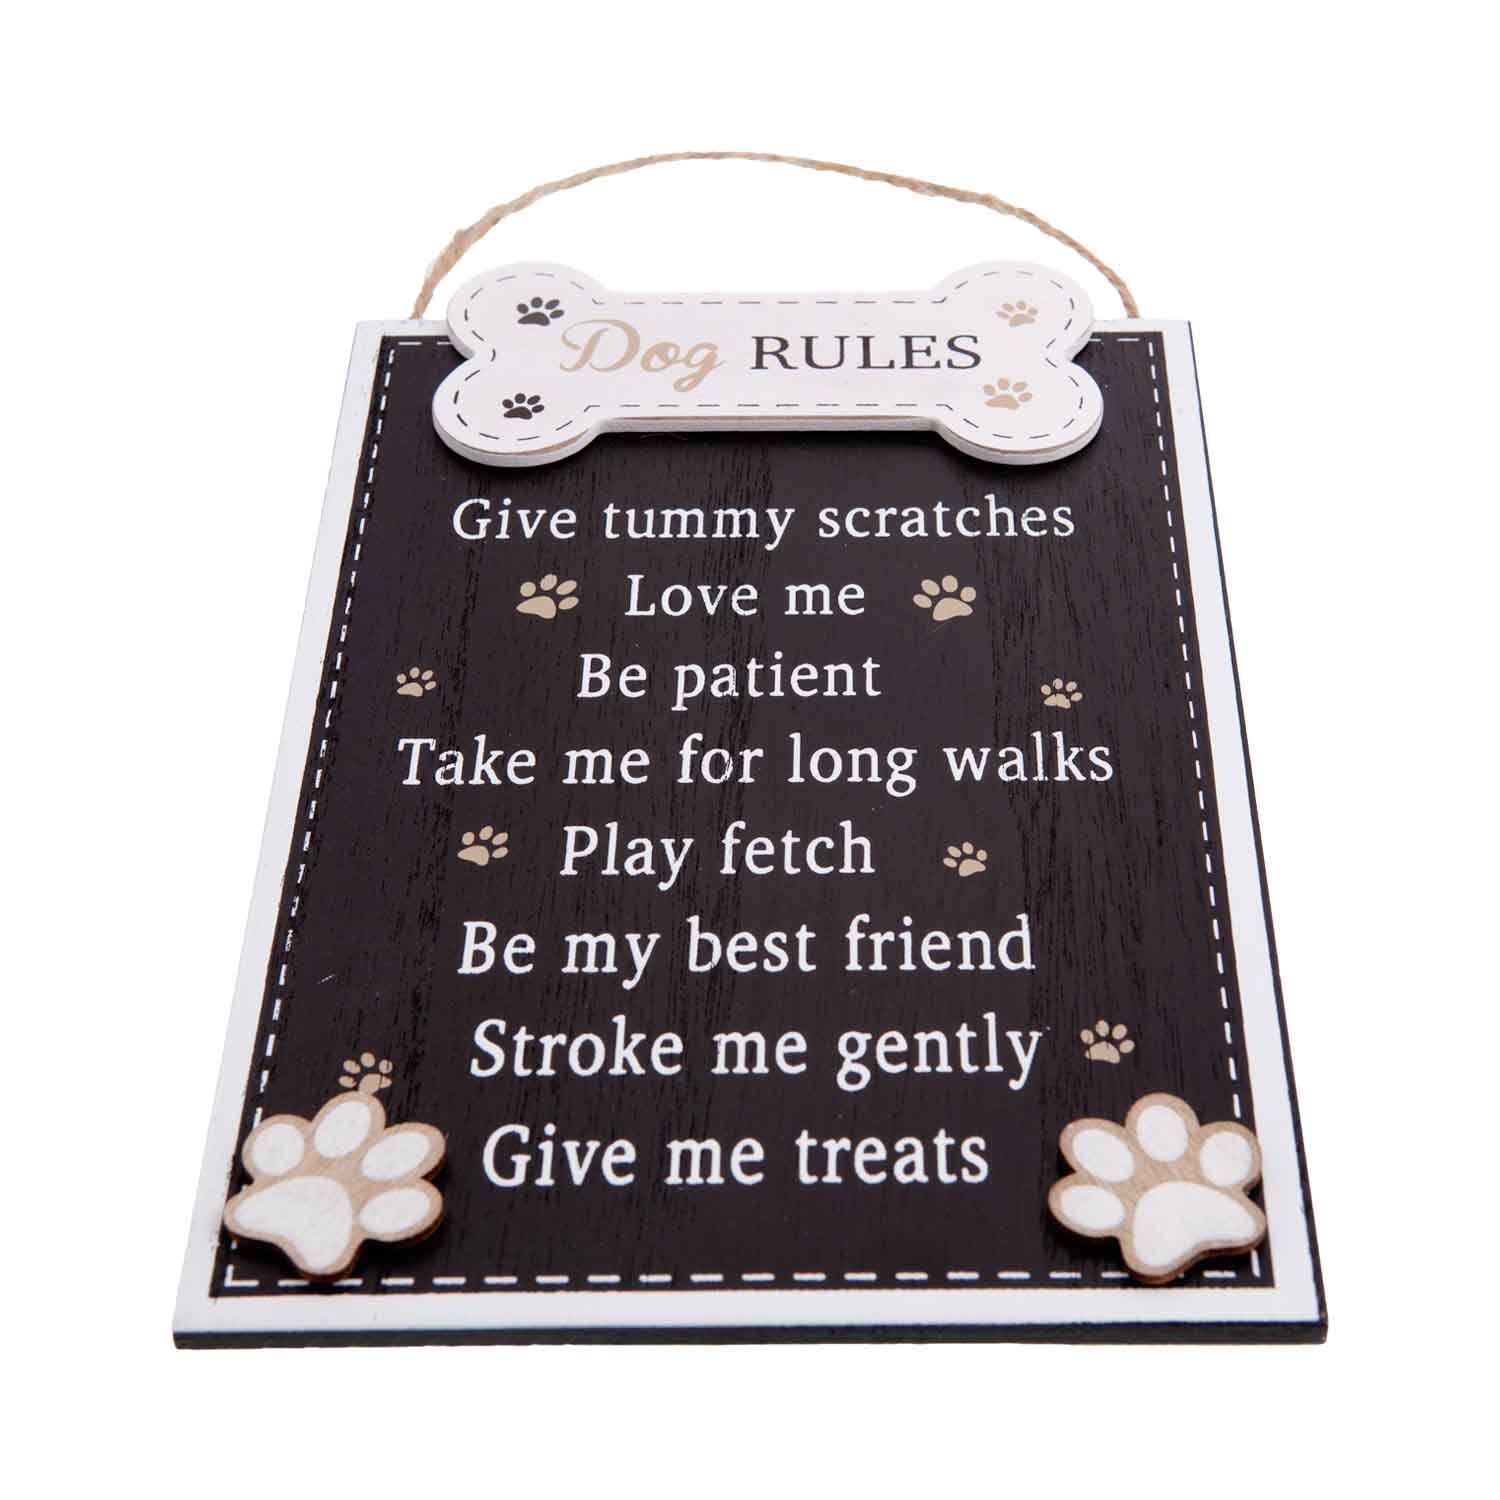 Dog Krazy Gifts - Dog Rules Plaque In Black, The Rules According To The Dog, Part Of The Wide Range of Dog Signs available from DogKrazyGifts.co.uk